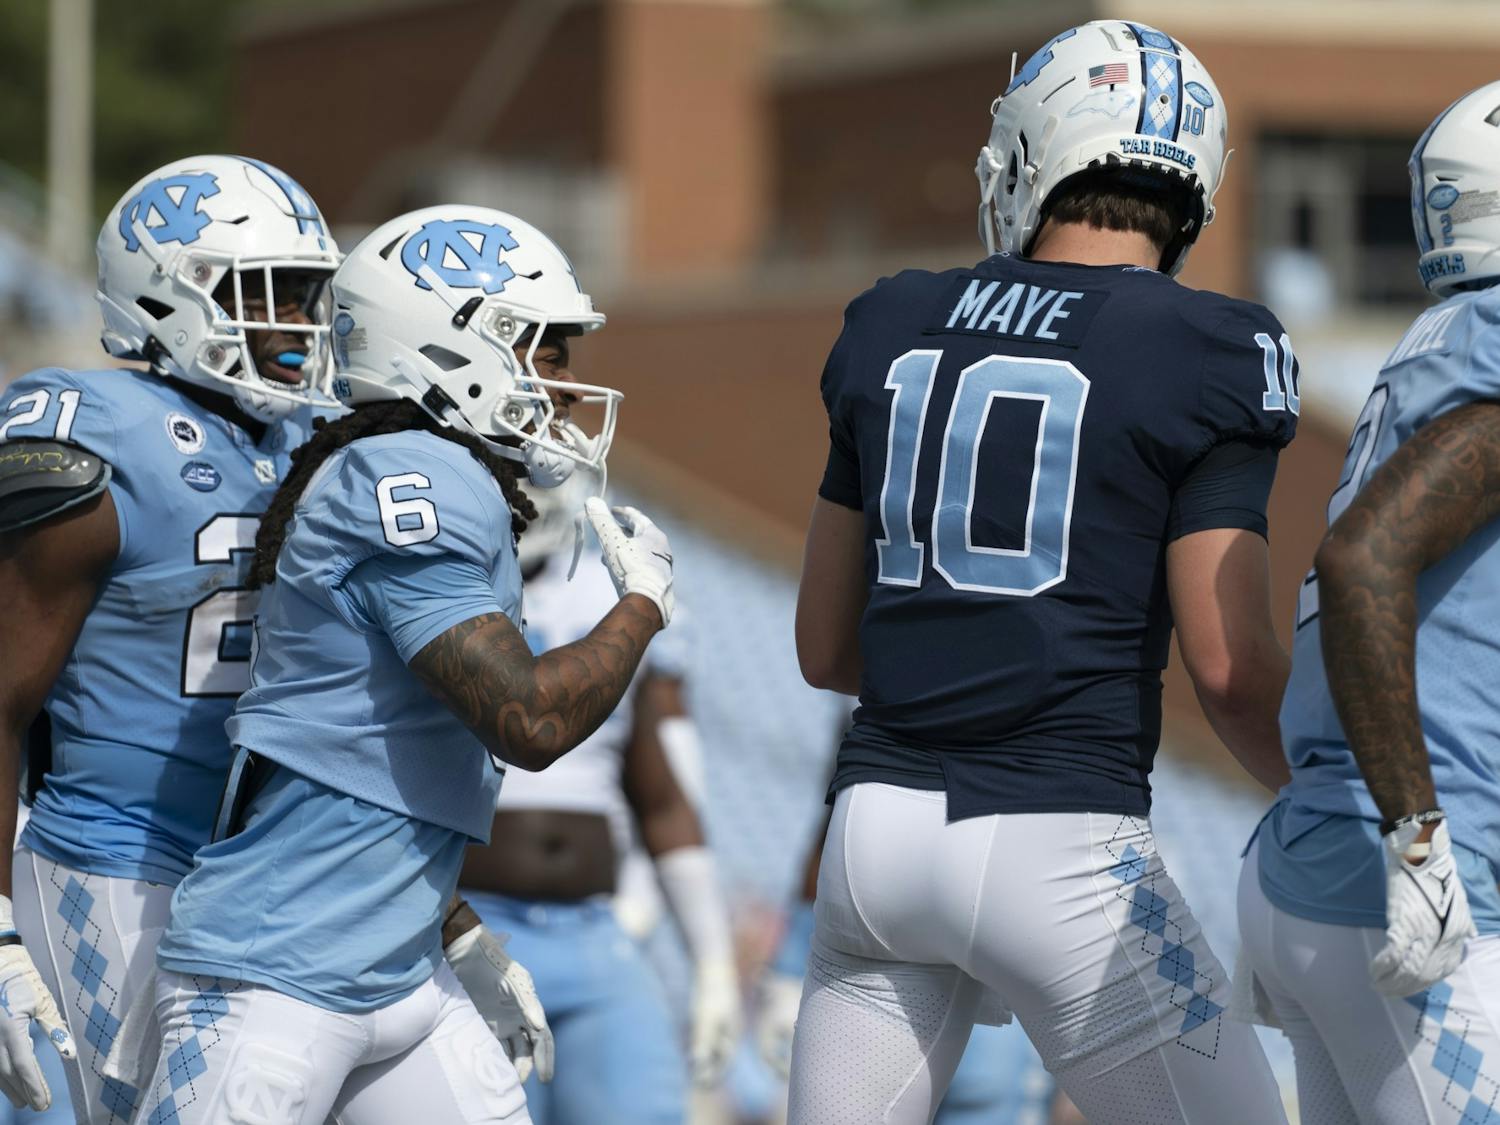 UNC junior wide receiver Nate McCollum (6) celebrates with UNC sophomore quarterback Drake Maye (10) after they scored a touchdown during the Spring Game in Kenan Stadium at on Saturday, April 15, 2023.